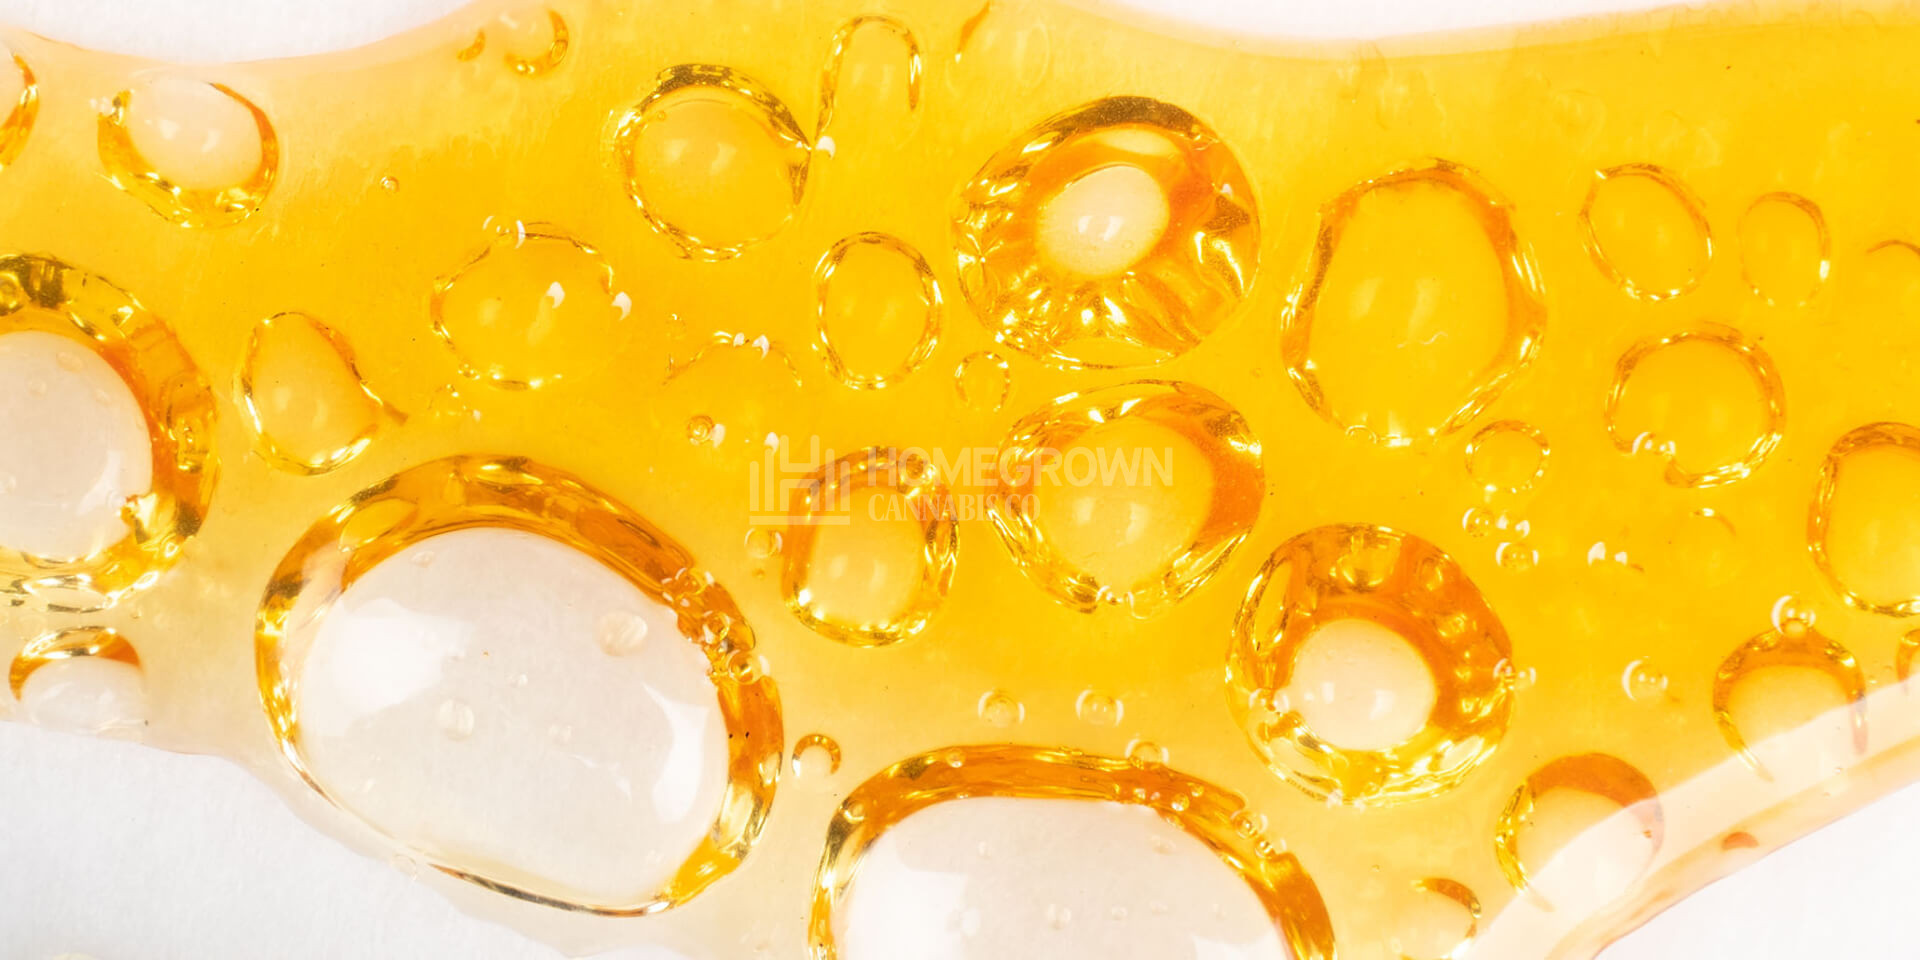 BHO concentrate